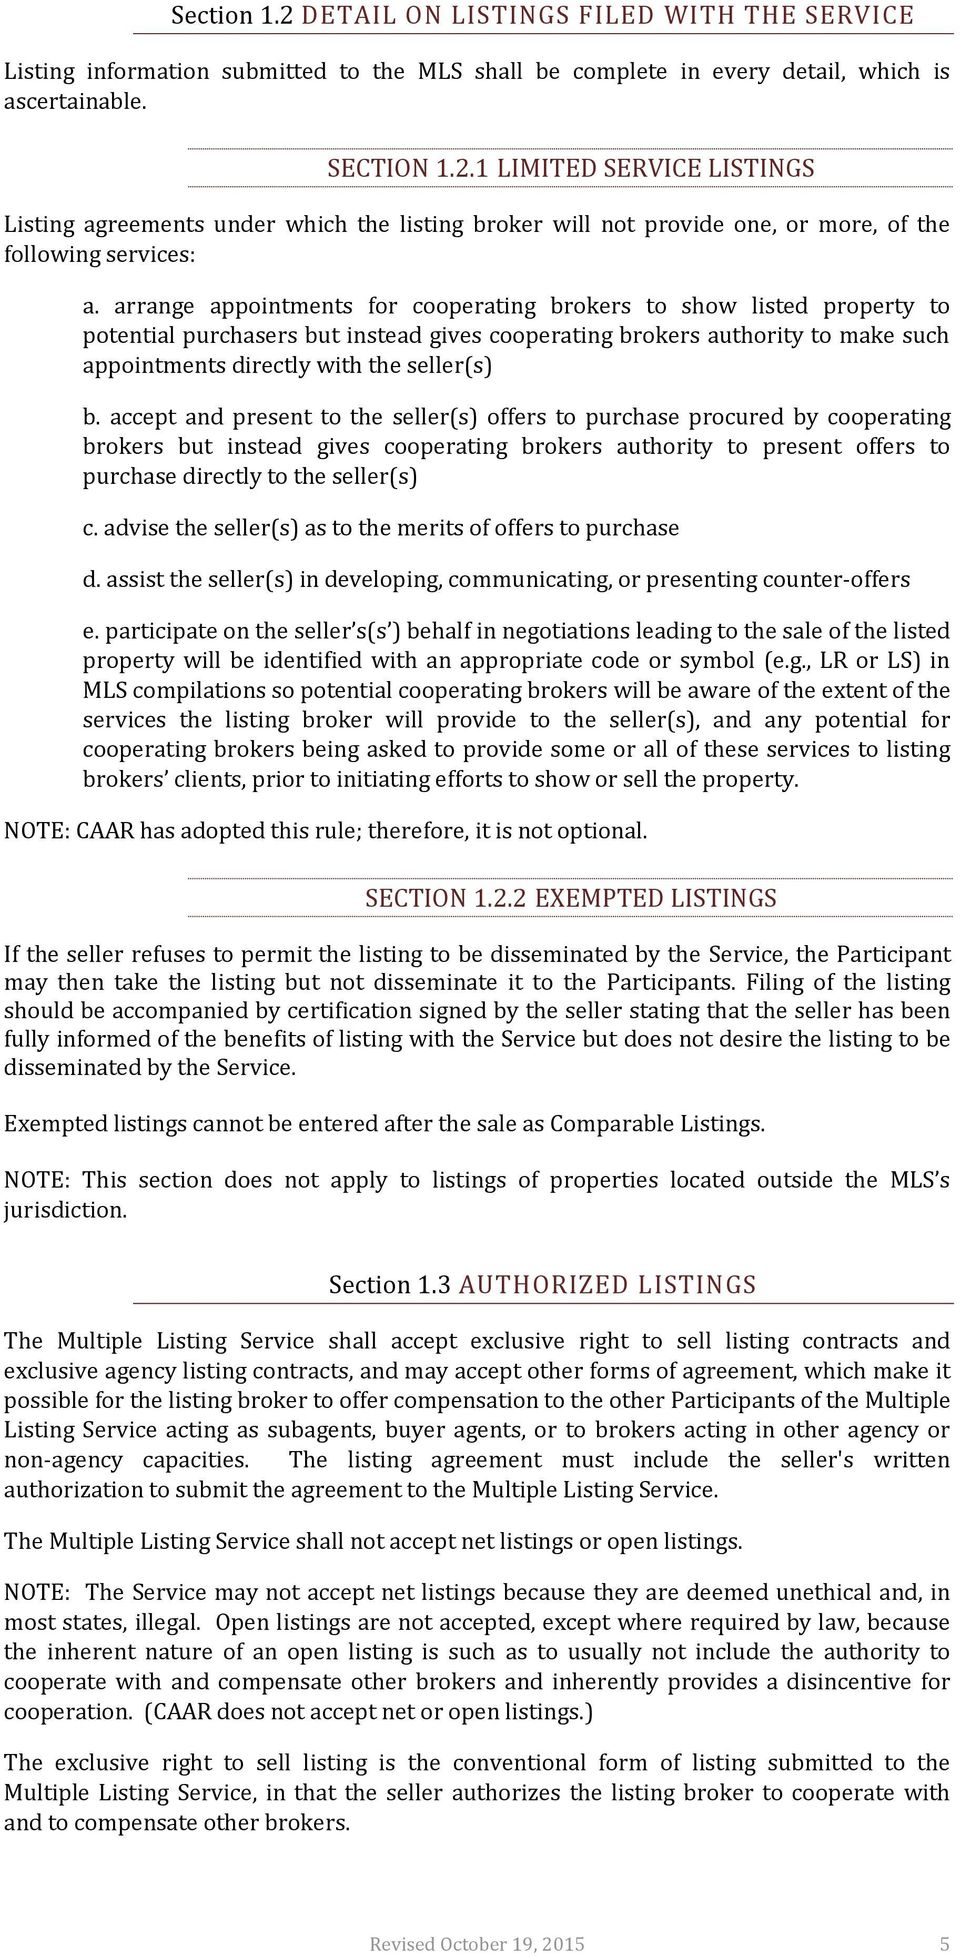 accept and present to the seller(s) offers to purchase procured by cooperating brokers but instead gives cooperating brokers authority to present offers to purchase directly to the seller(s) c.